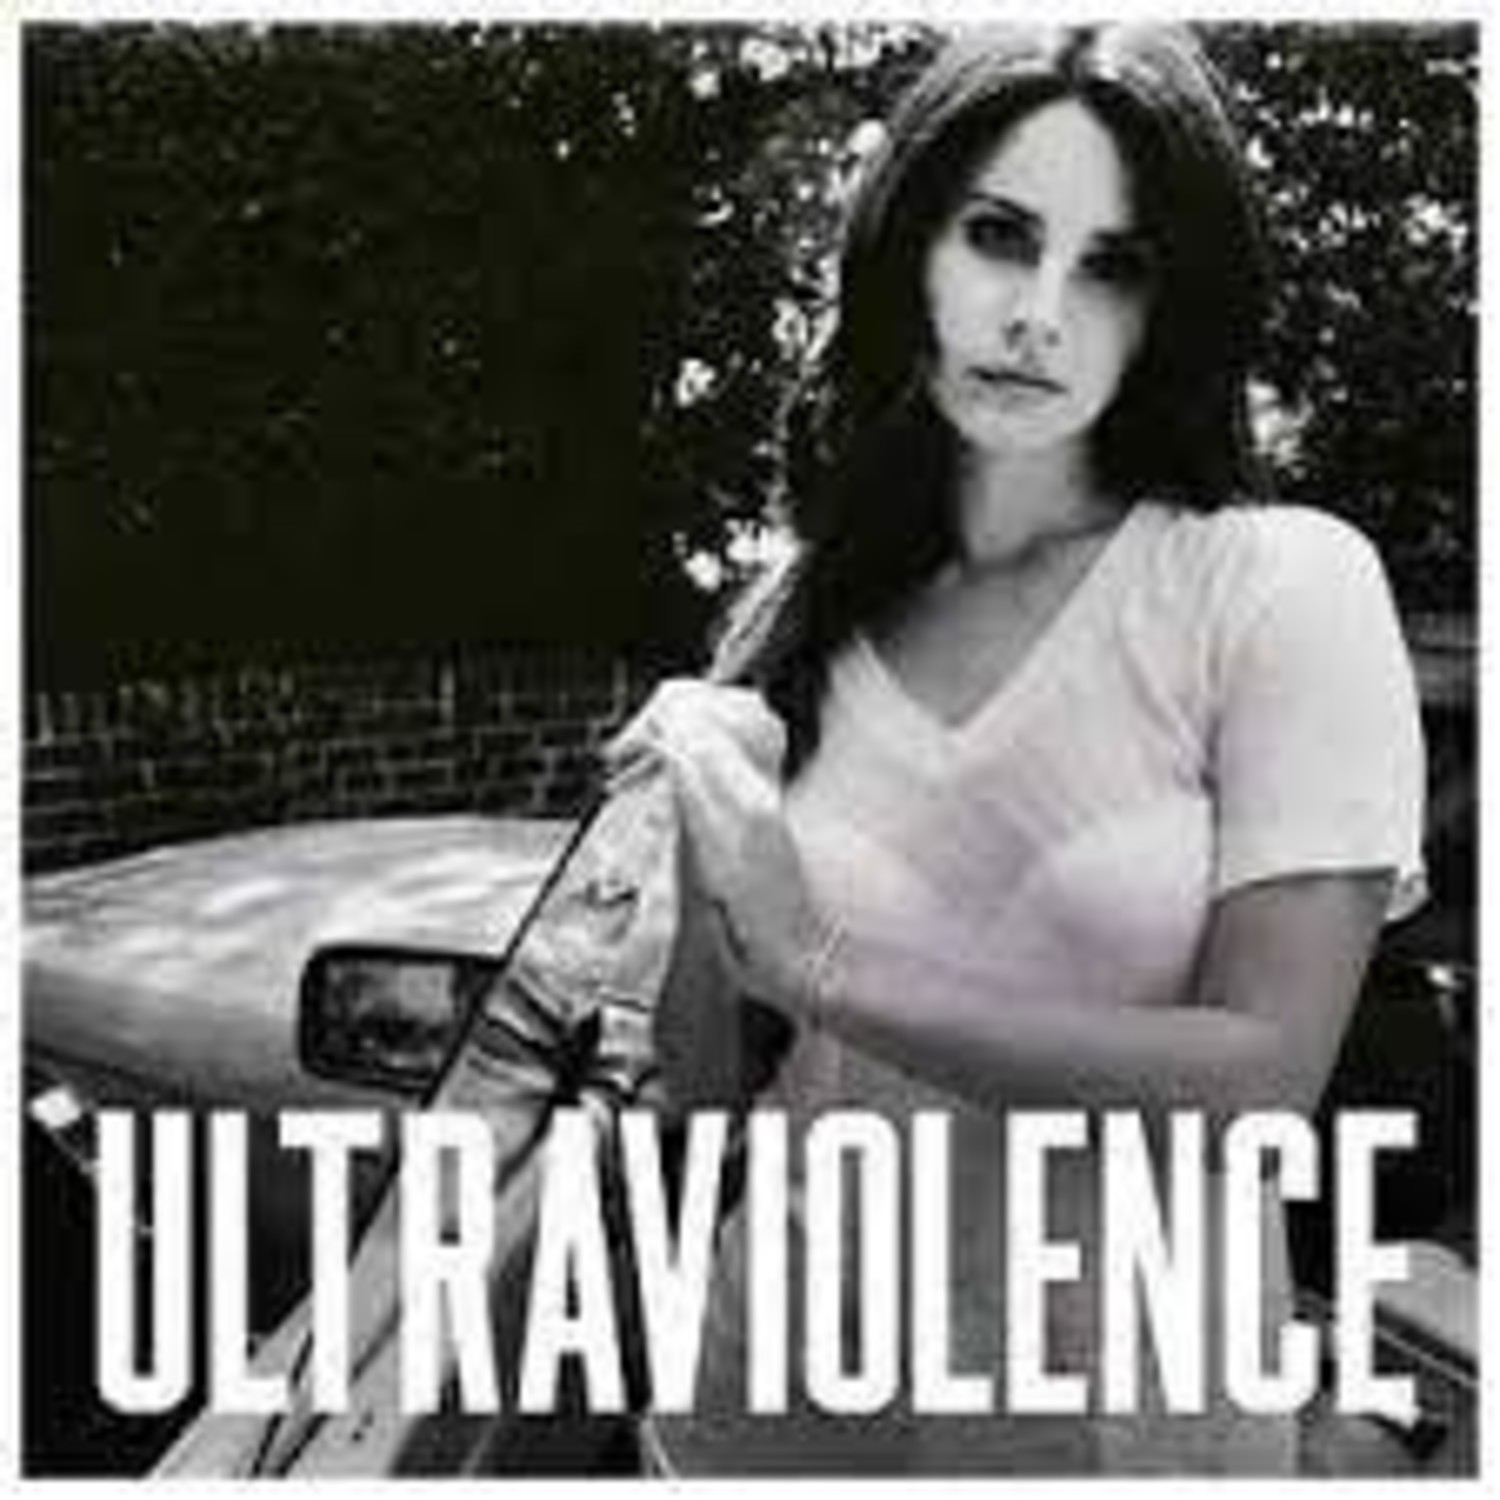 Ultraviolence Poster Black and White Lana Del Rey Album Cover - Happy Place  for Music Lovers